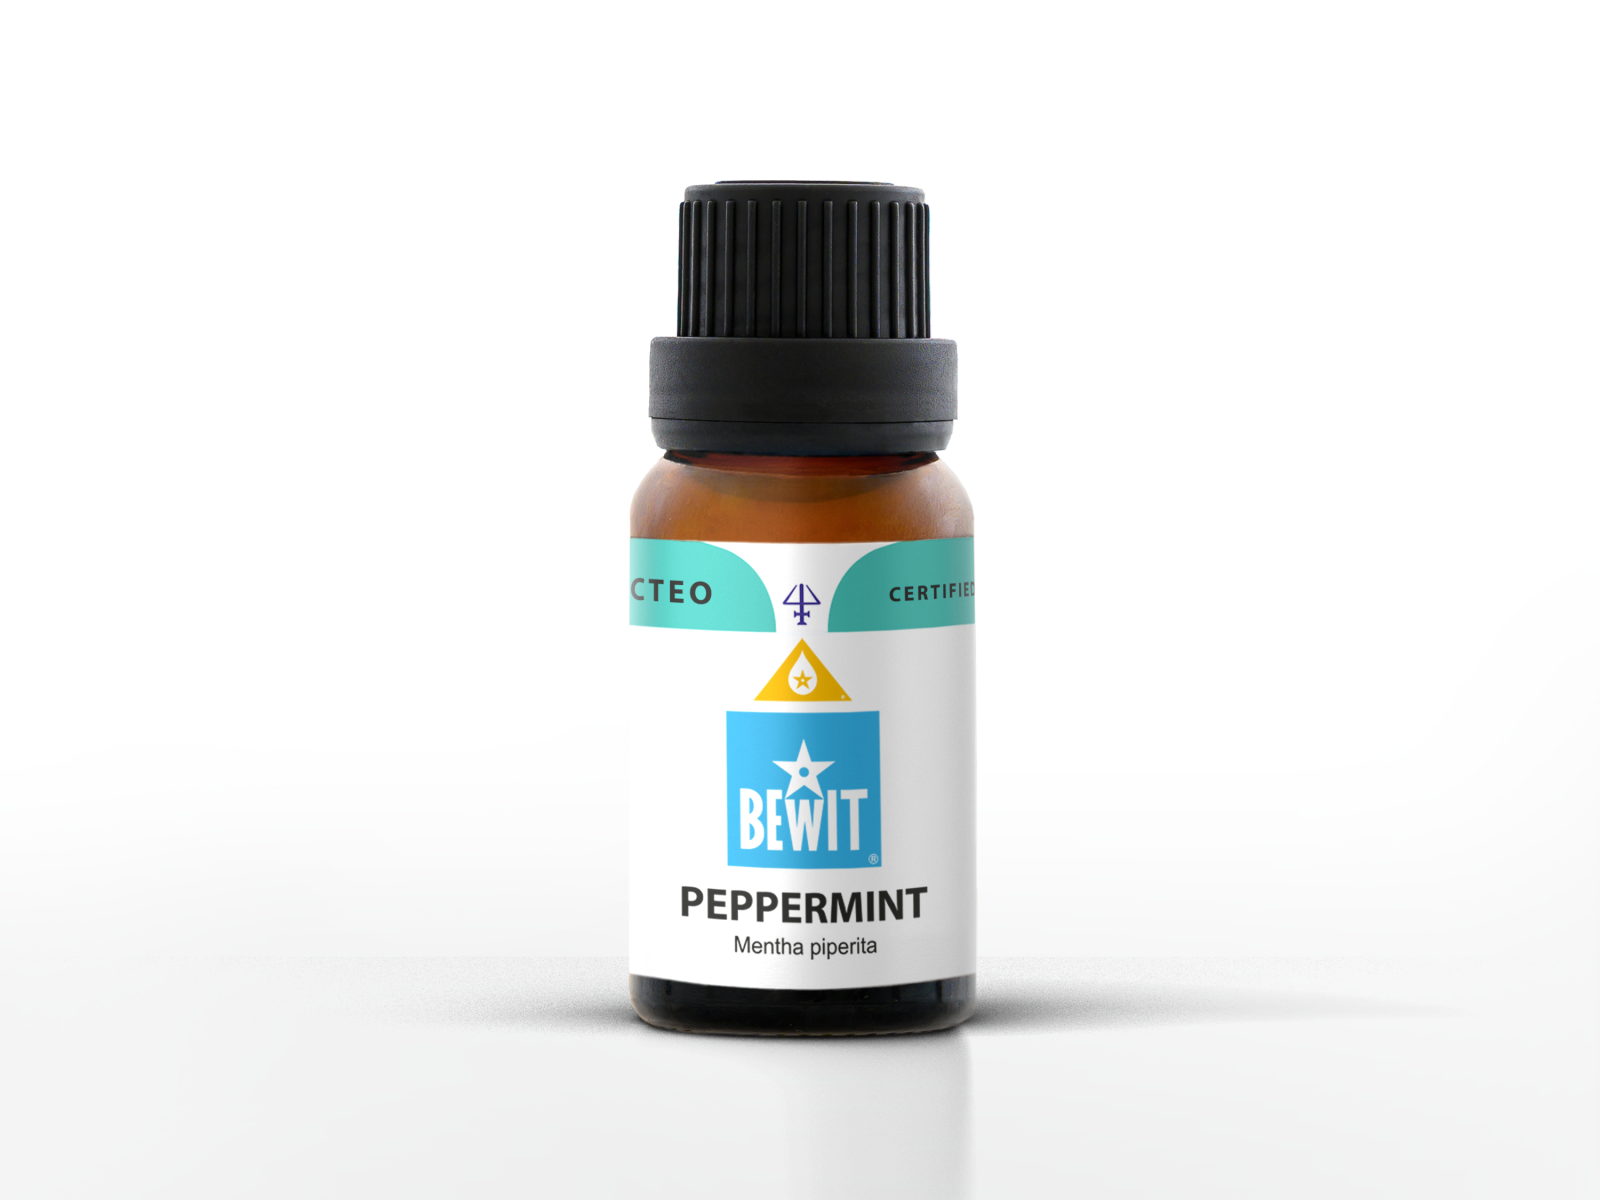 Peppermint - It is a 100% pure essential oil - 3